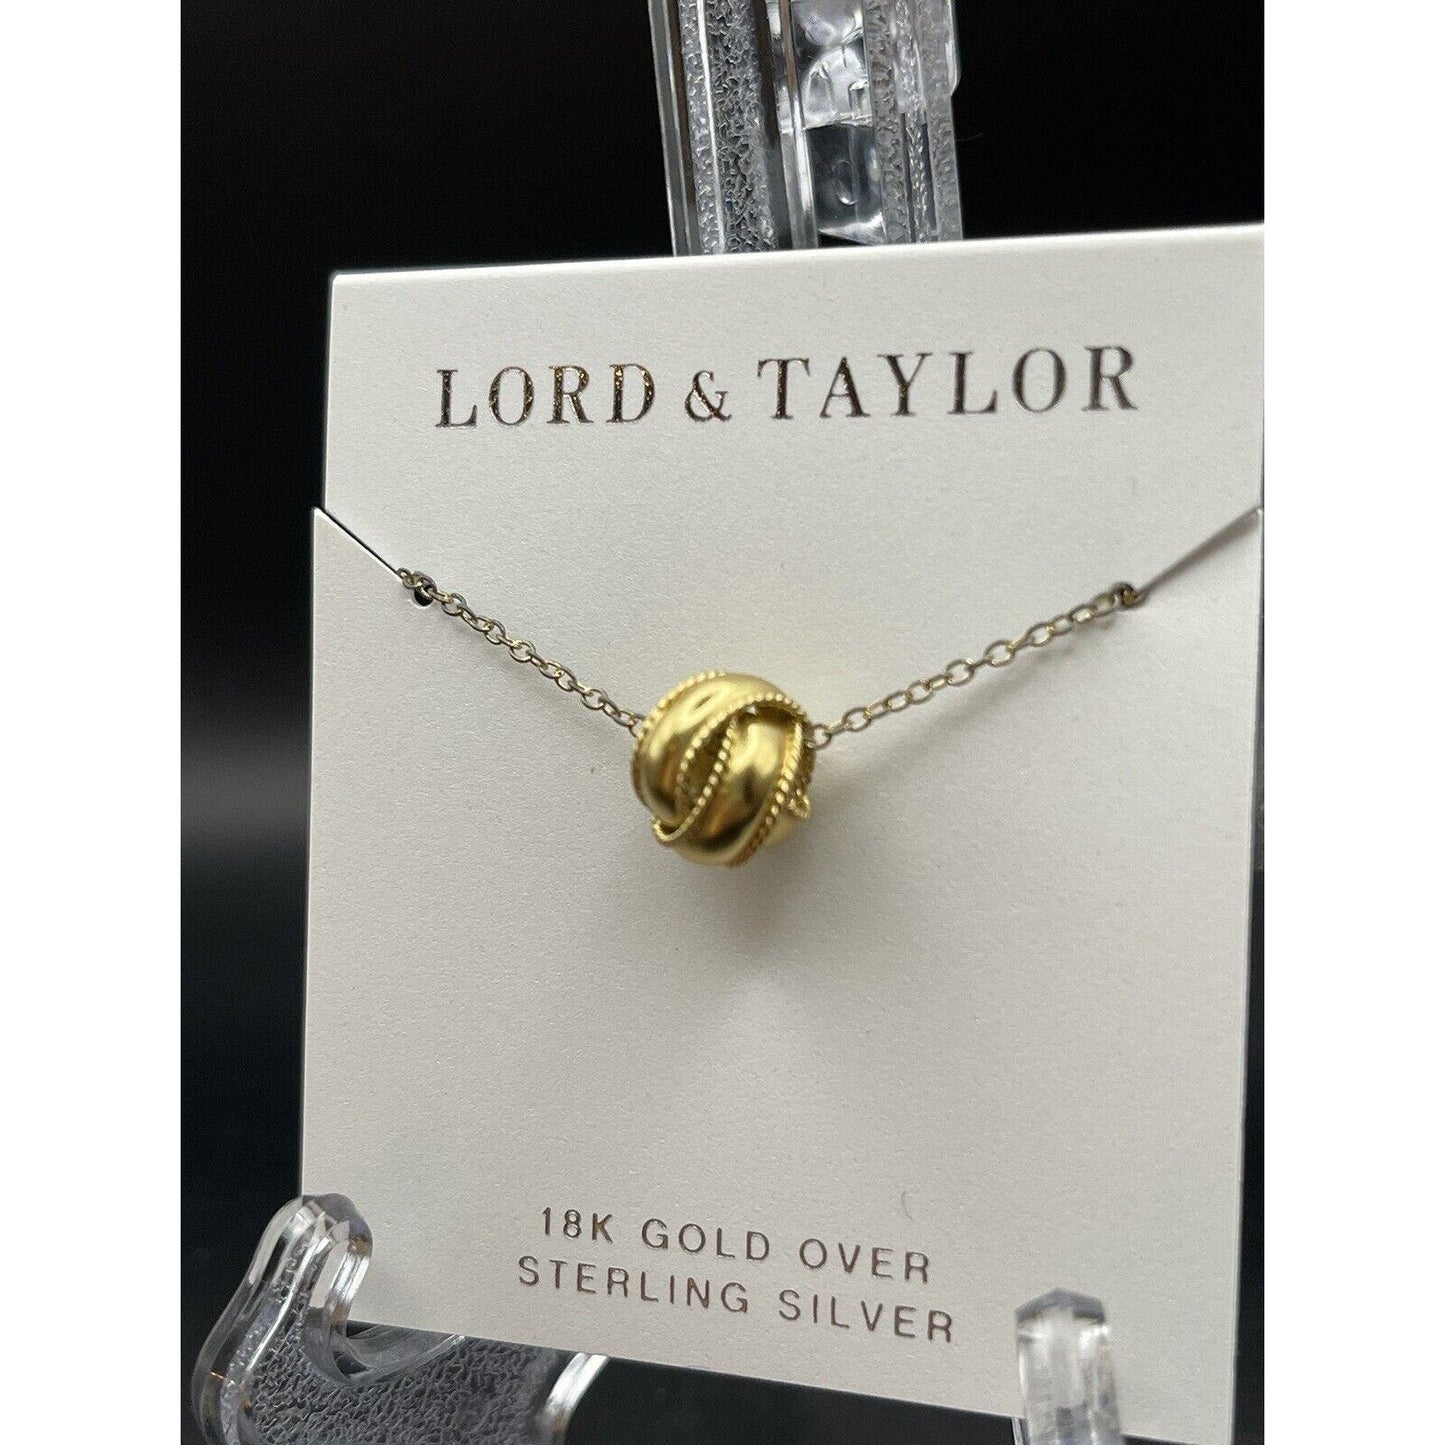 18K Gold Over Sterling Silver Necklace By Lord & Taylor Brand New With Tags $70